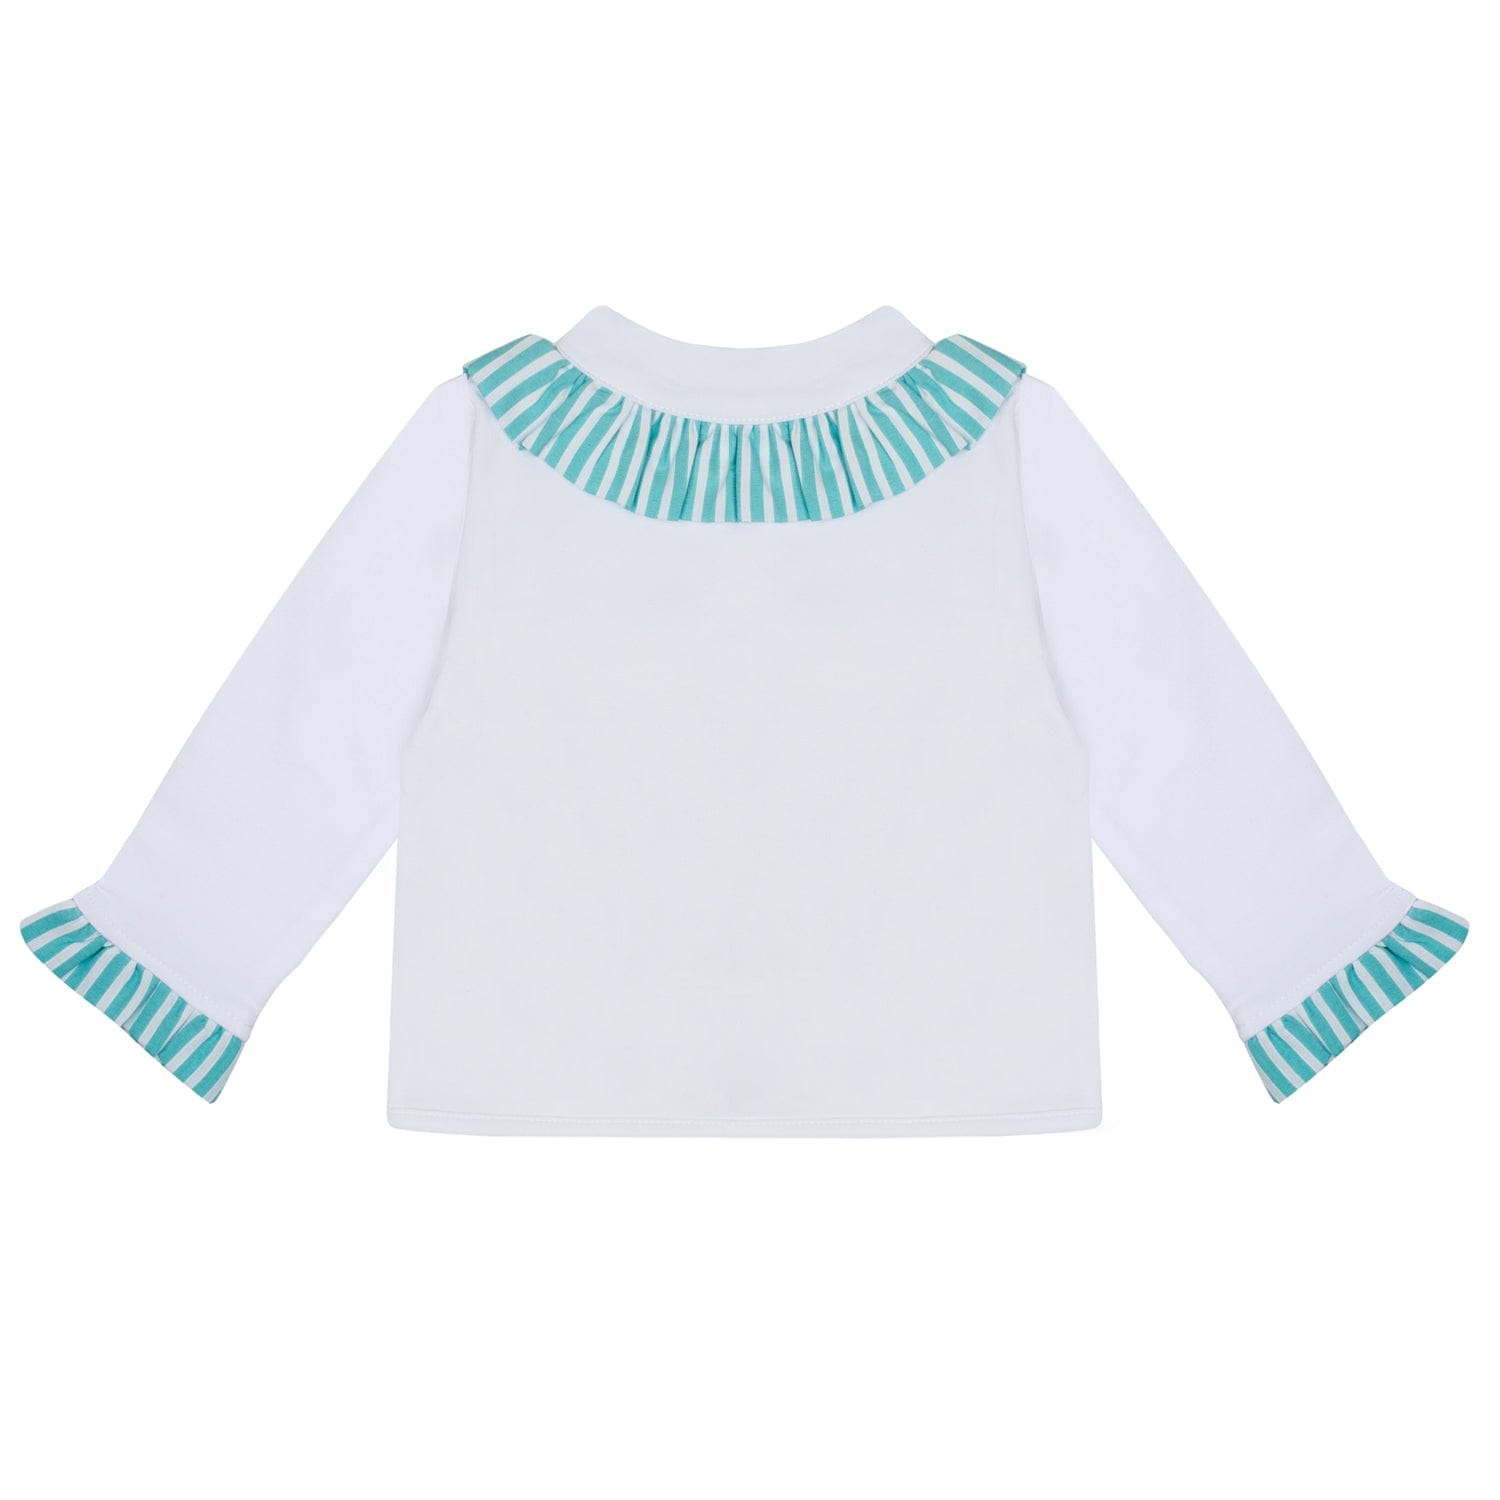 LITTLE A - Kaly Little Fish Cardigan - White